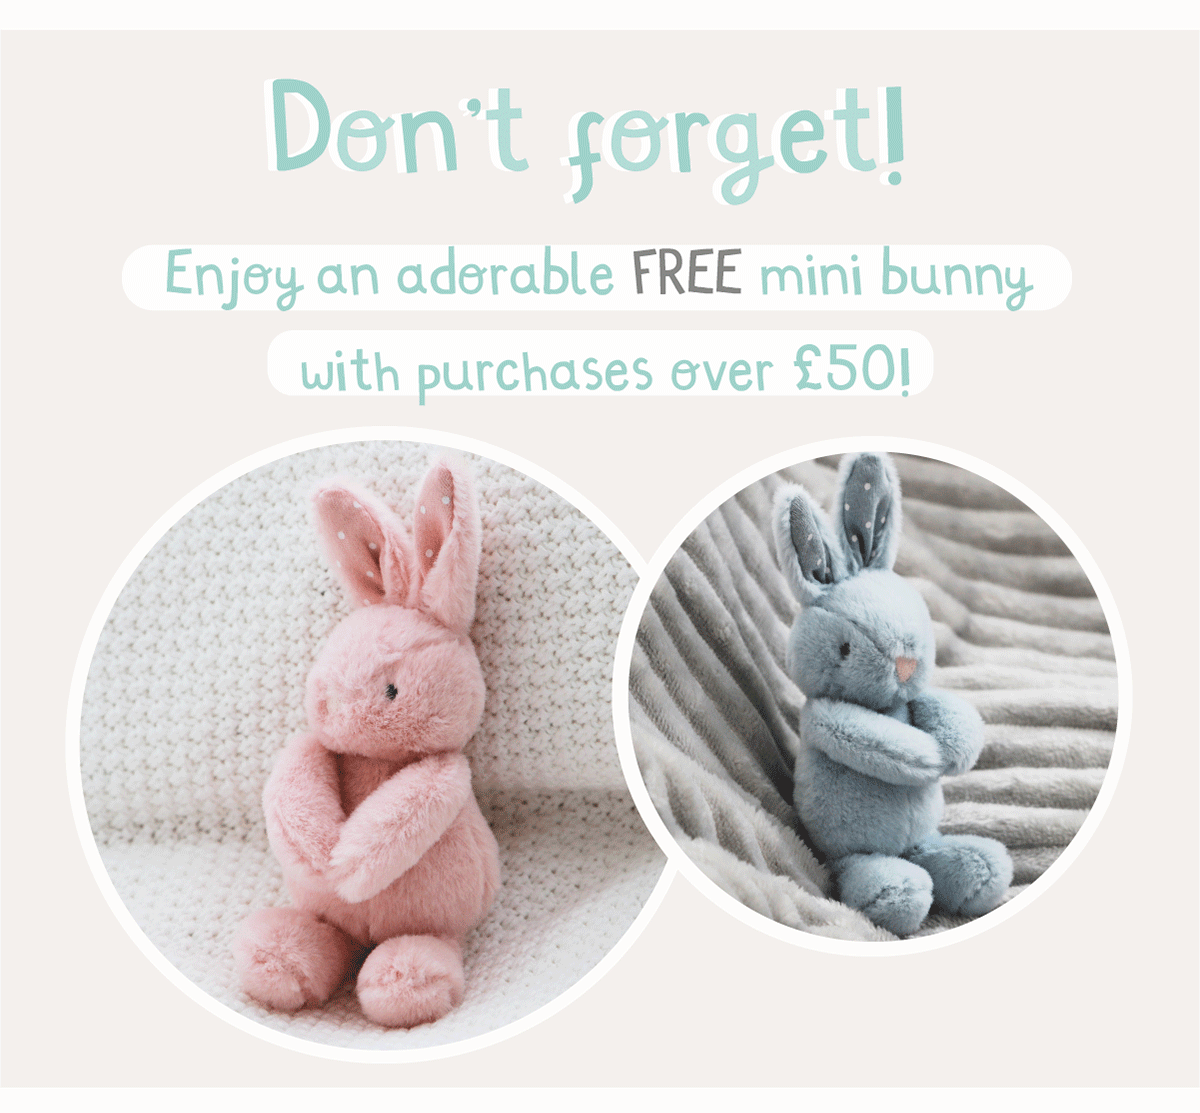 Don't forget! Enjoy an adorable FREE mini bunny with purchases over £50!